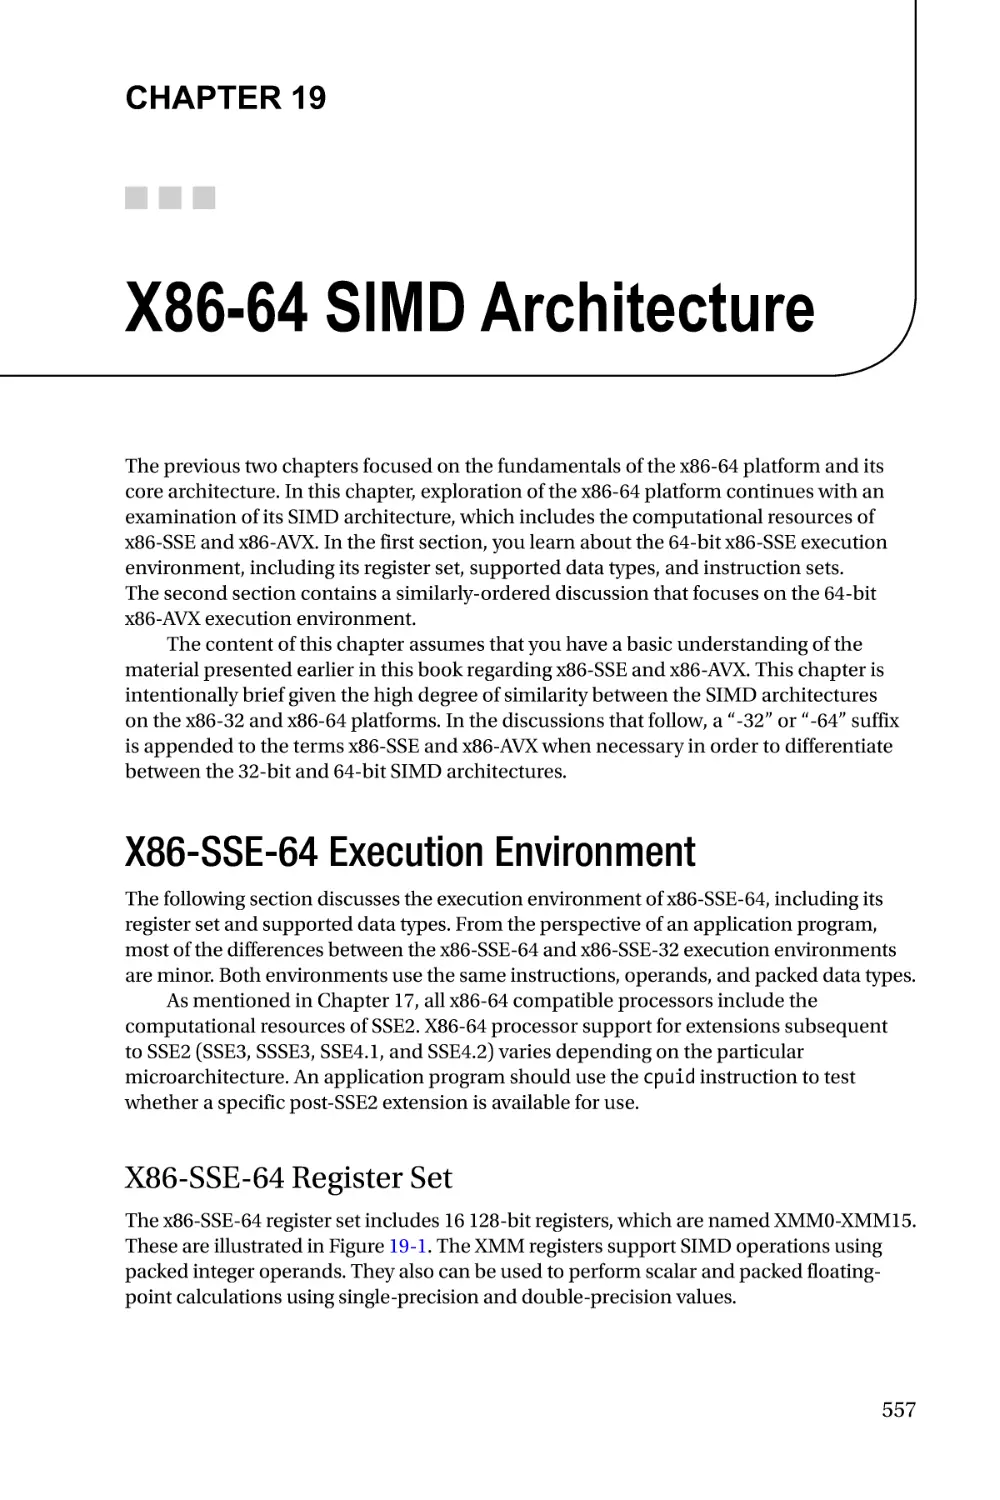 Chapter 19
X86-SSE-64 Execution Environment
X86-SSE-64 Register Set